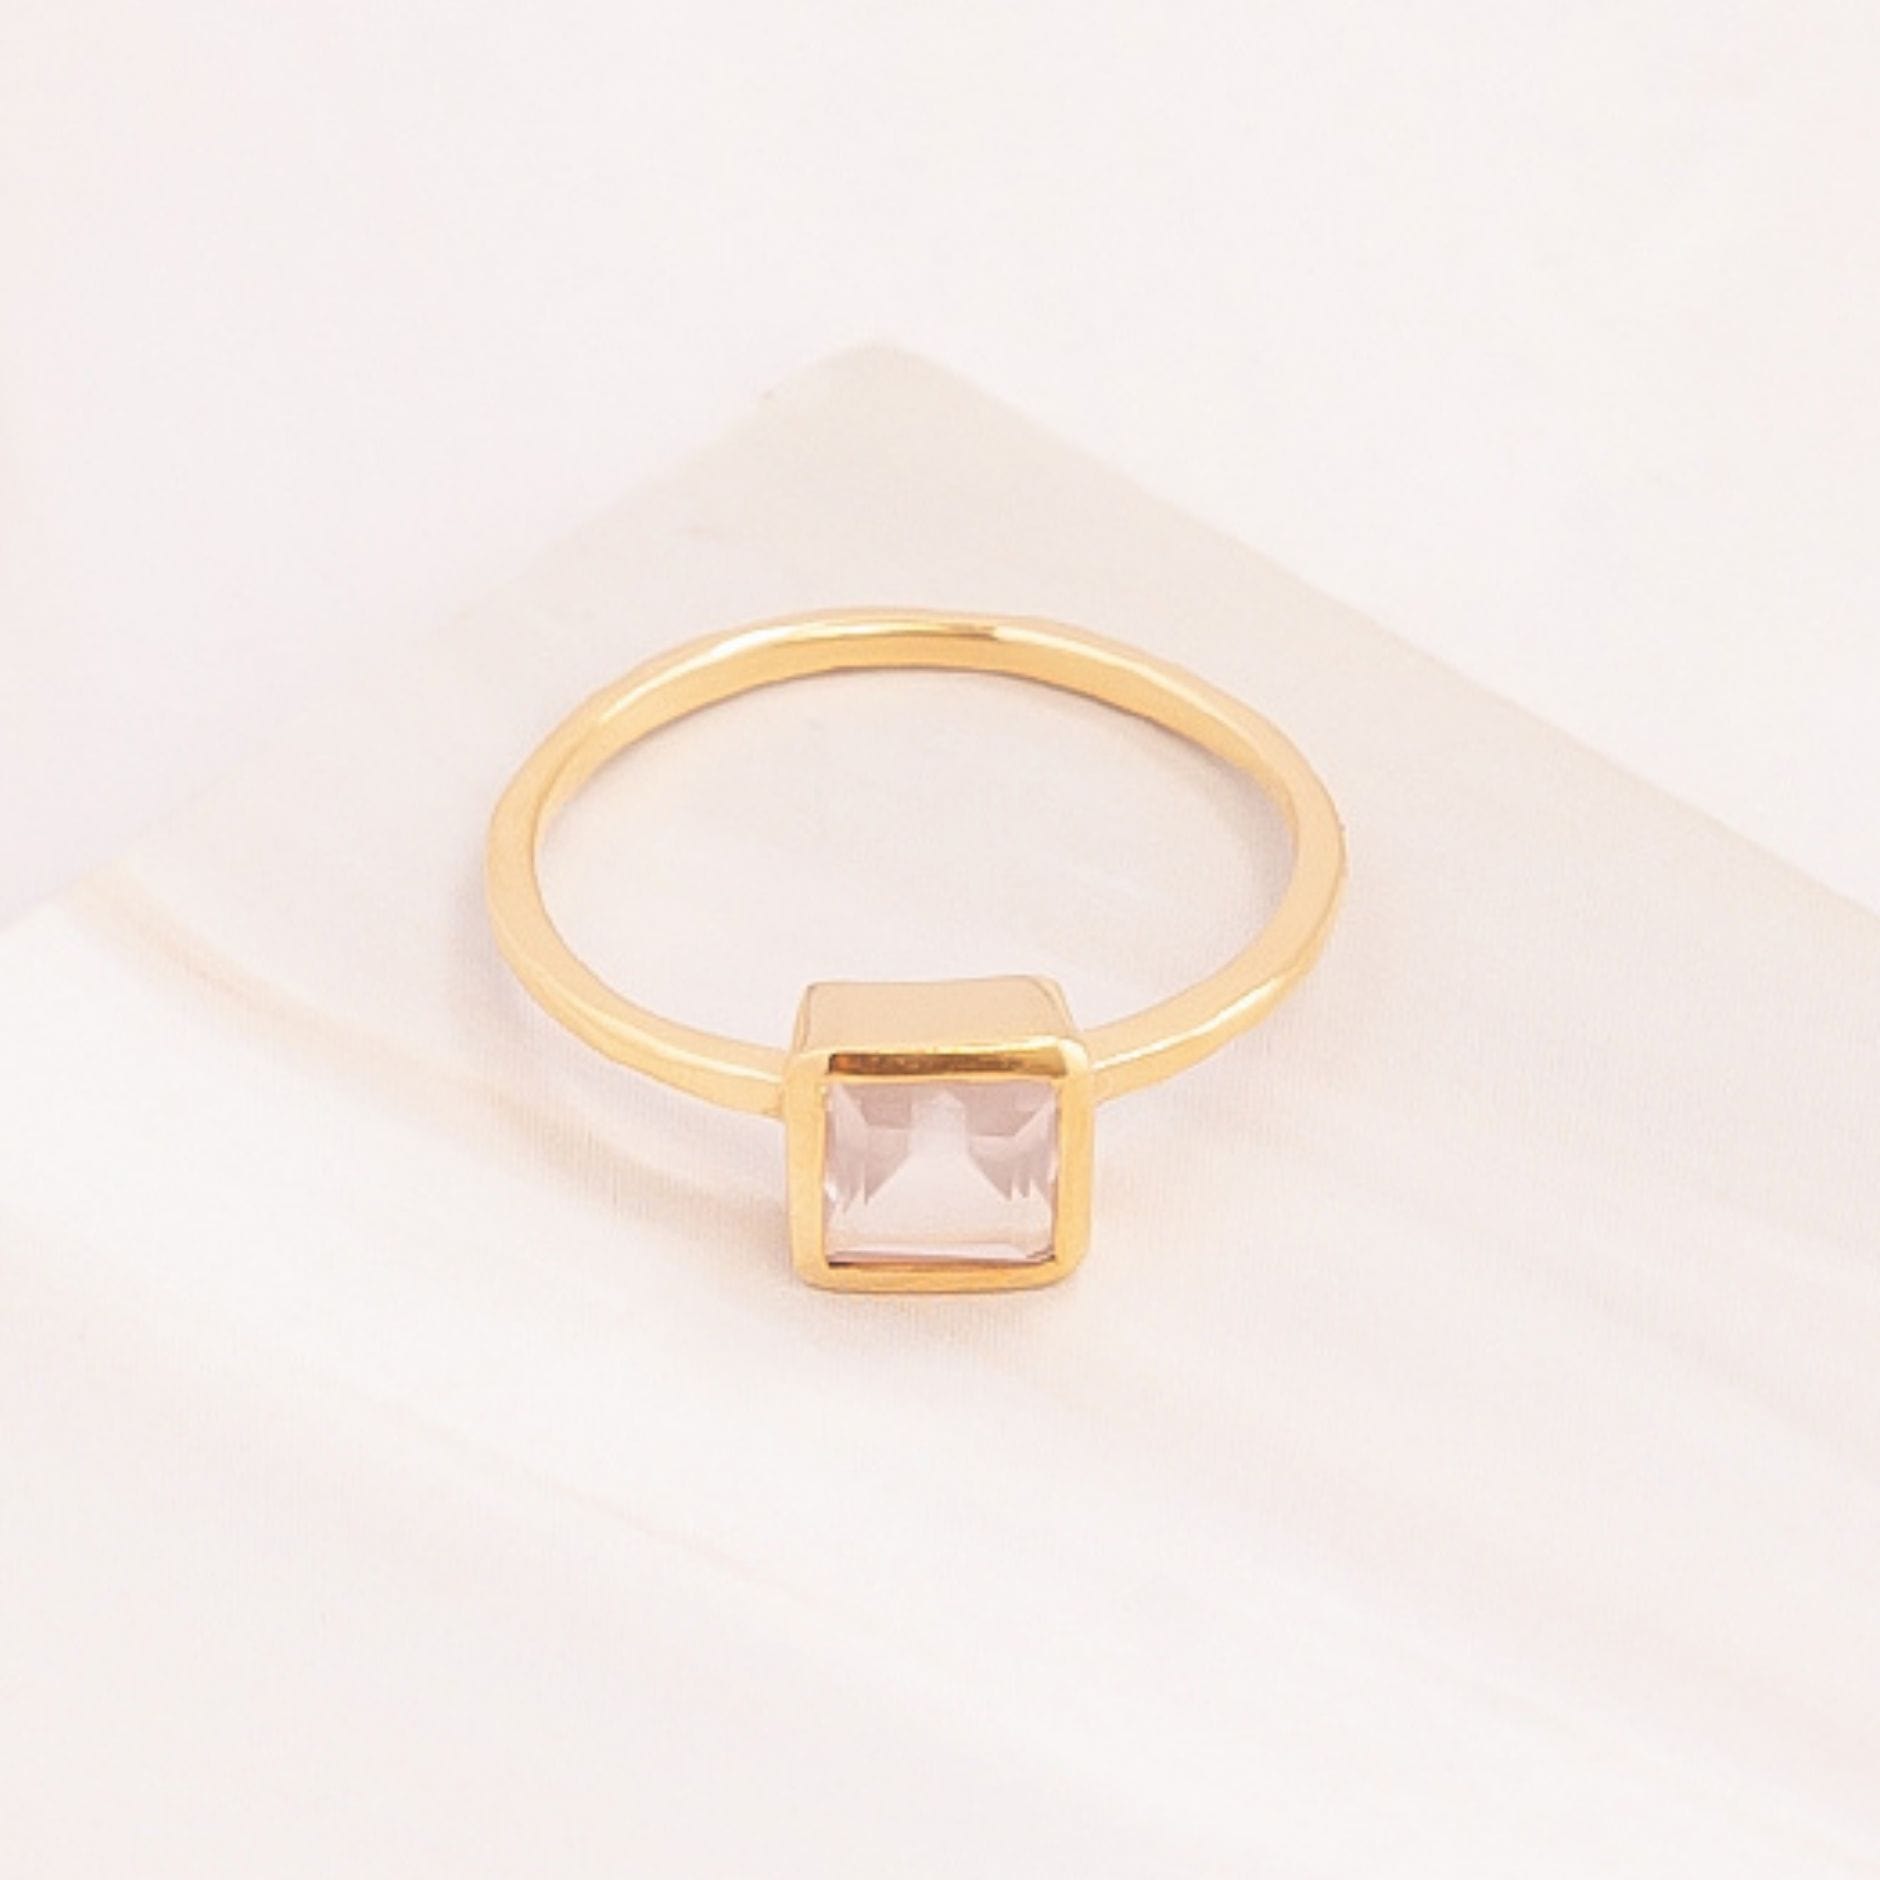 Emblem Jewelry Rings Rose Quartz / Square Signature Candy Gemstone Stack Rings (Ring Size 4)